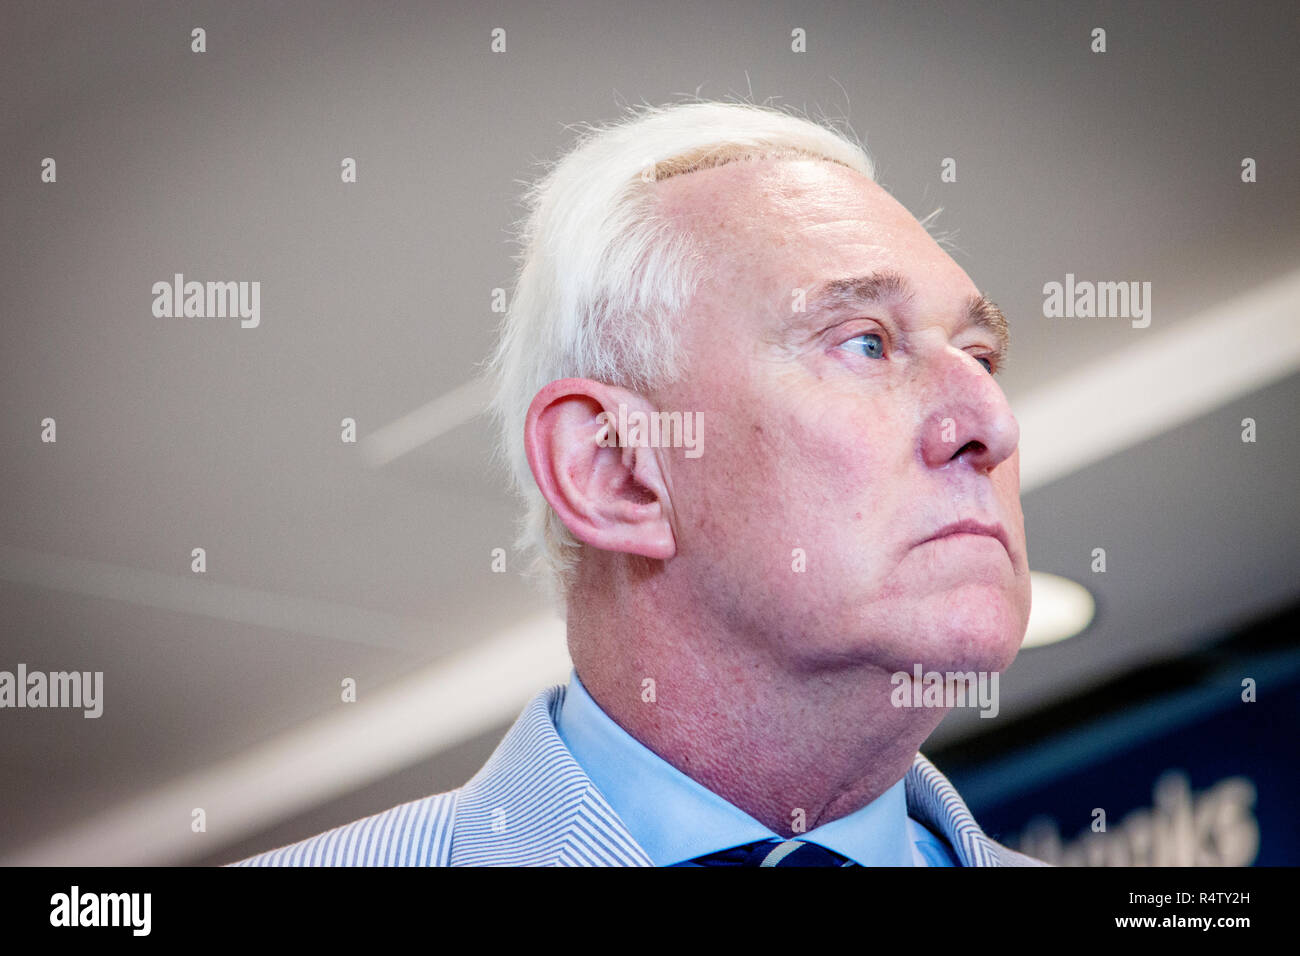 Former adviser to Donald Trump, Roger Stone at a book signing event in Cleveland during the Republican National Convention in 2016. Stock Photo